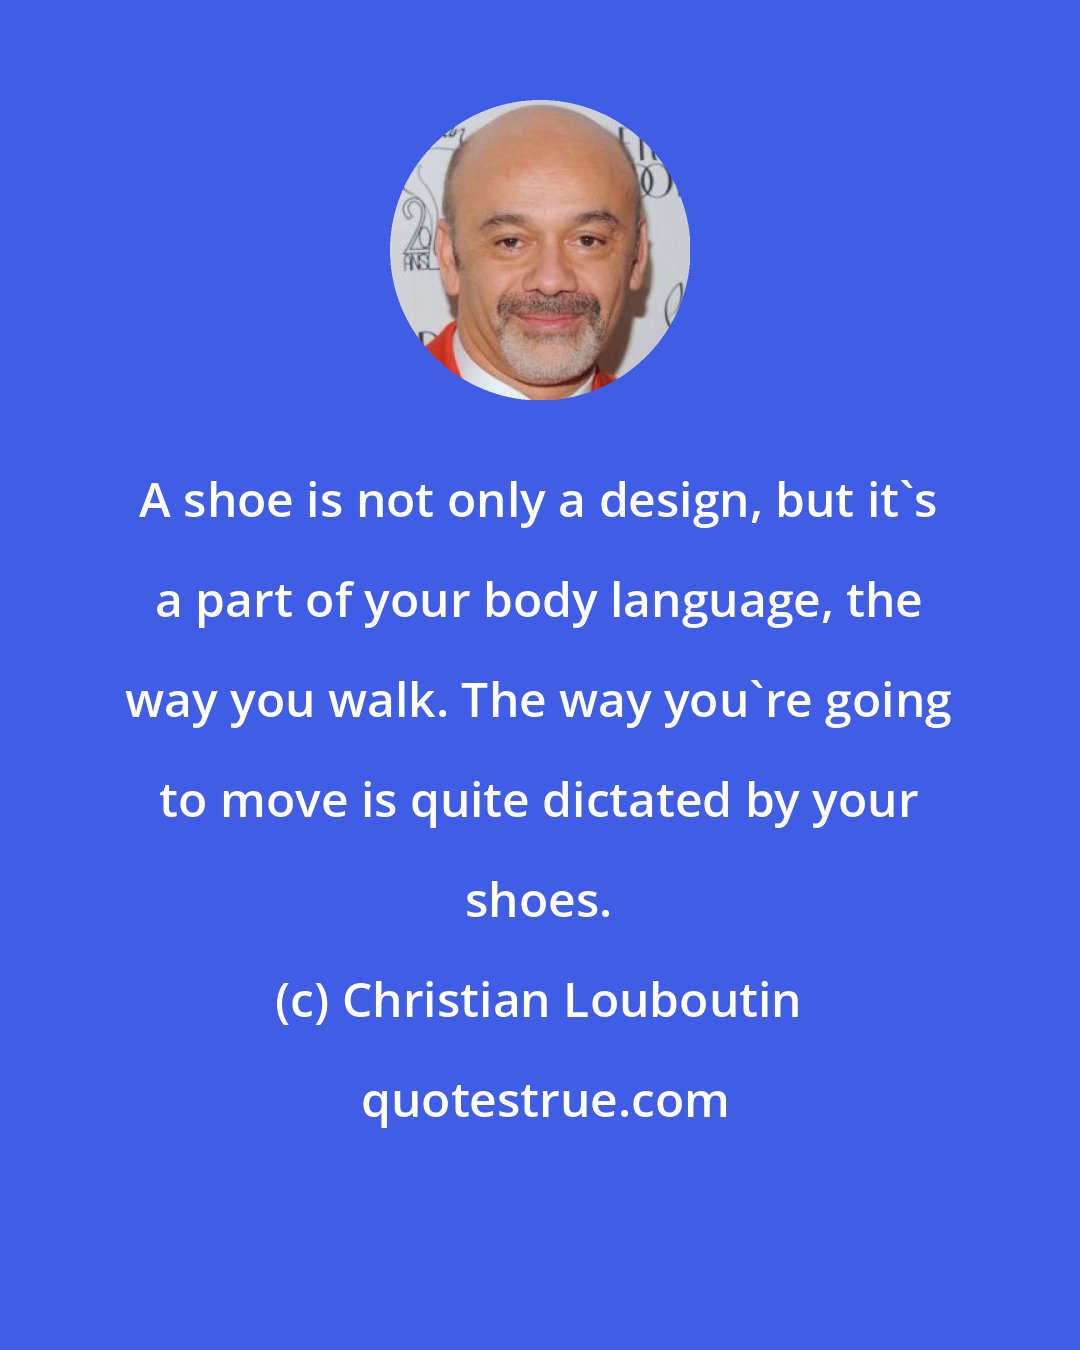 Christian Louboutin: A shoe is not only a design, but it's a part of your body language, the way you walk. The way you're going to move is quite dictated by your shoes.